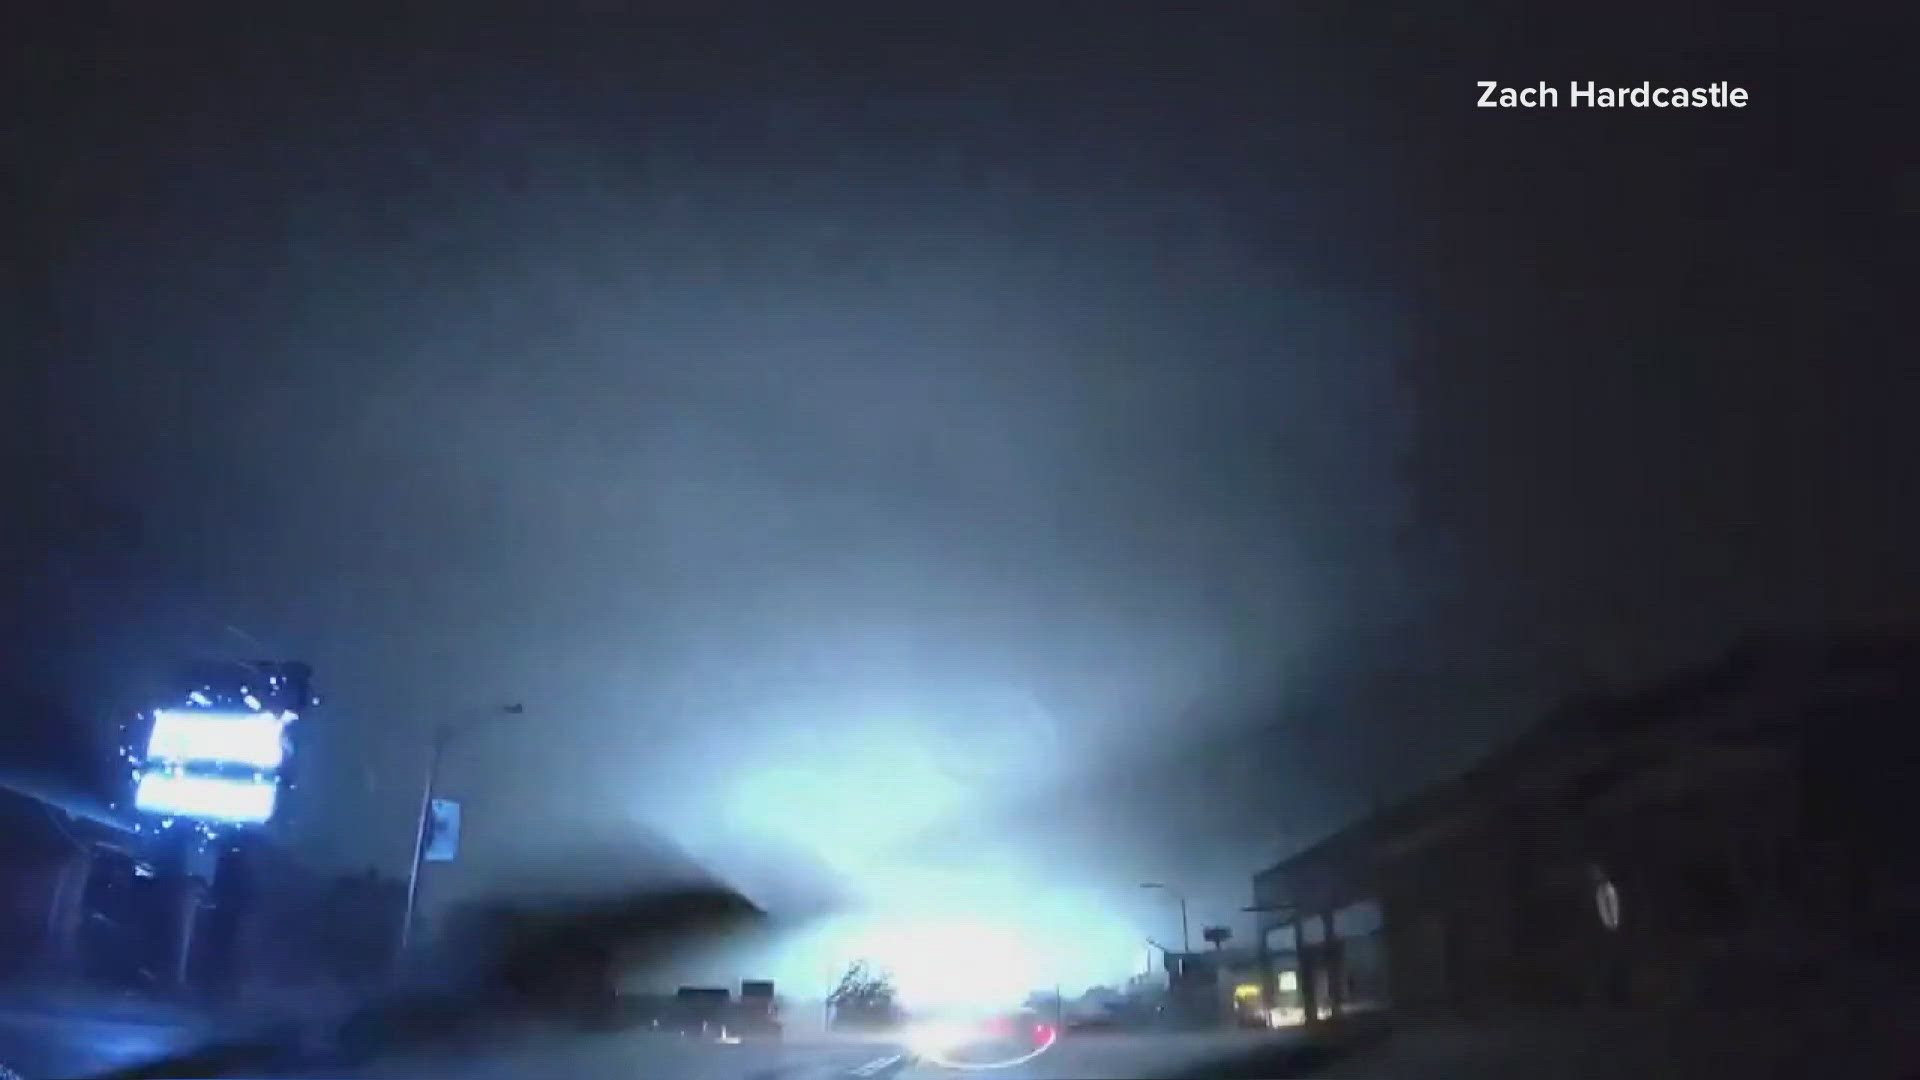 Video shows a tornado touching down in Sulphur, Oklahoma overnight.